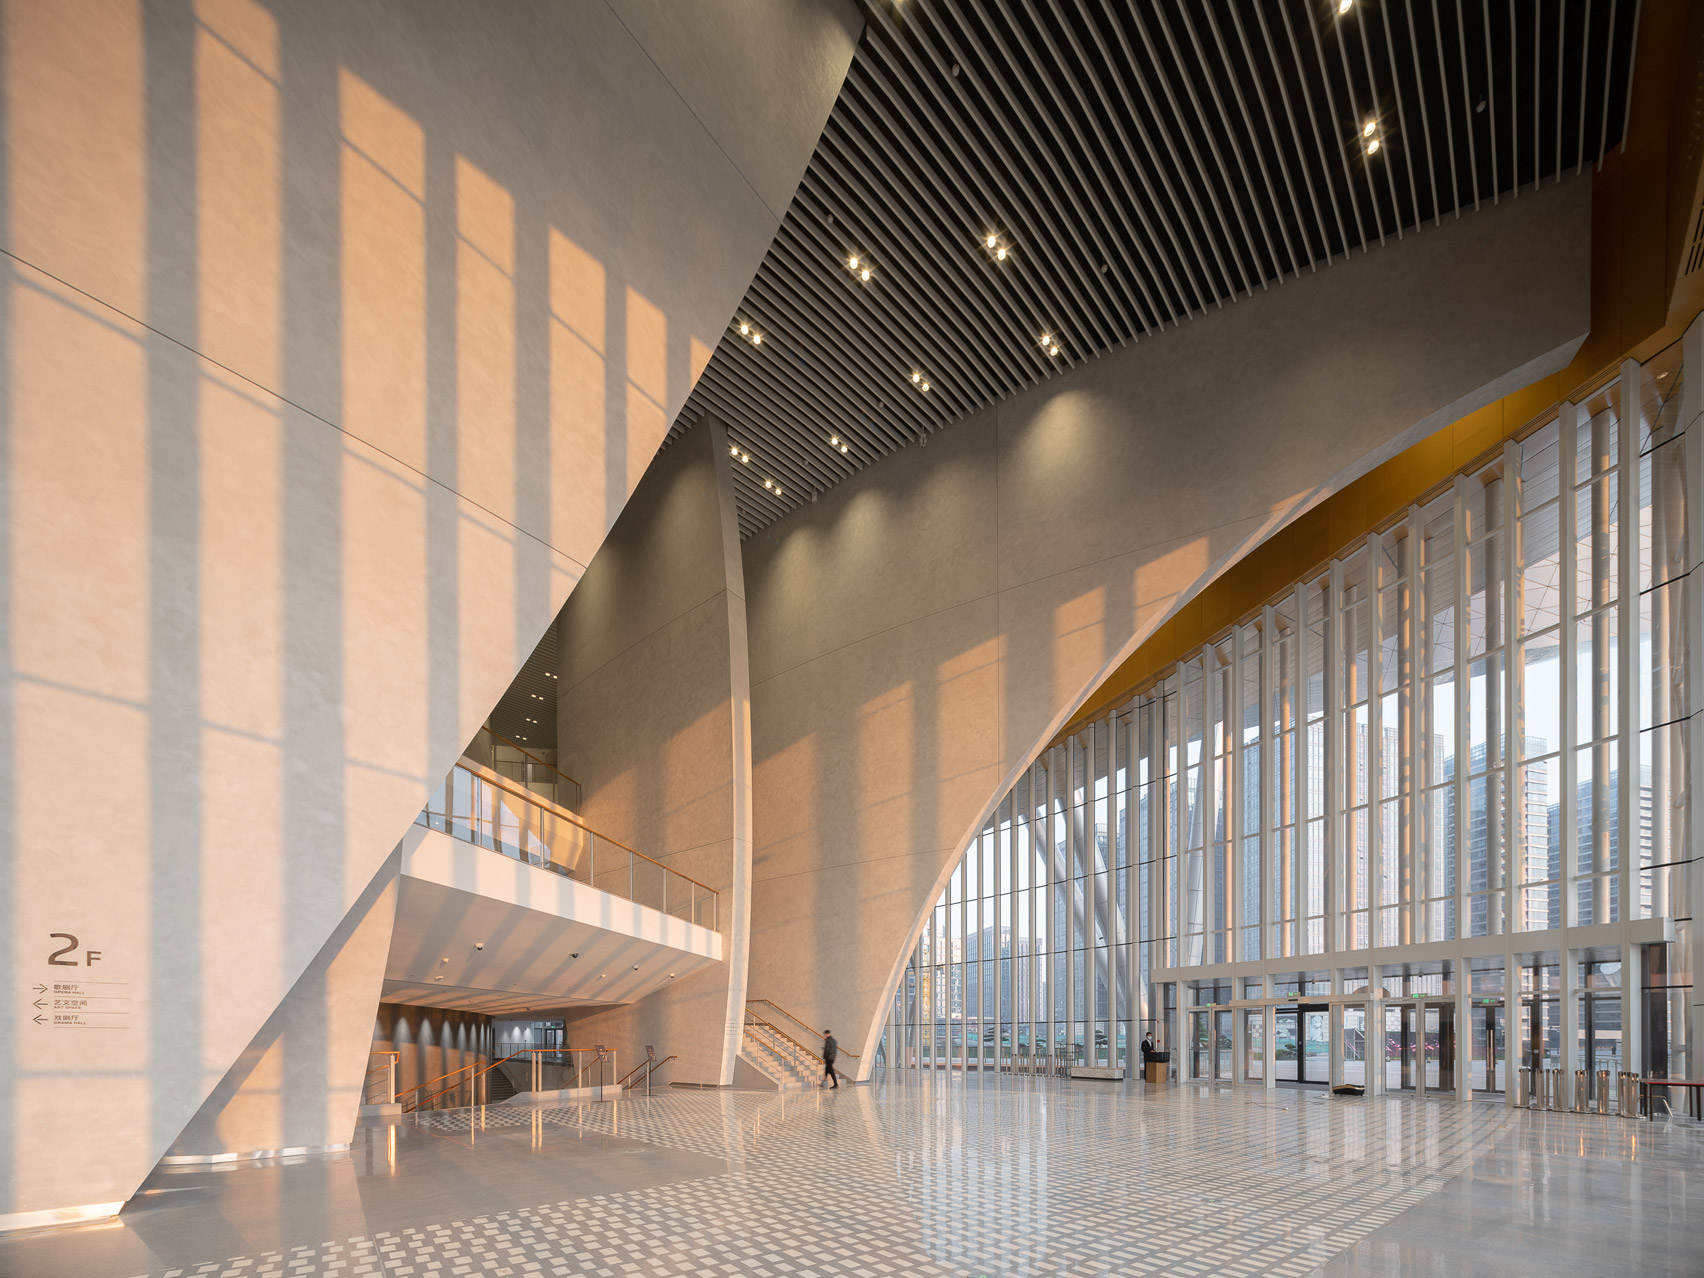 The entrance to the theatre of the Suzhou Bay Cultural Center by Christian de Portzamparc